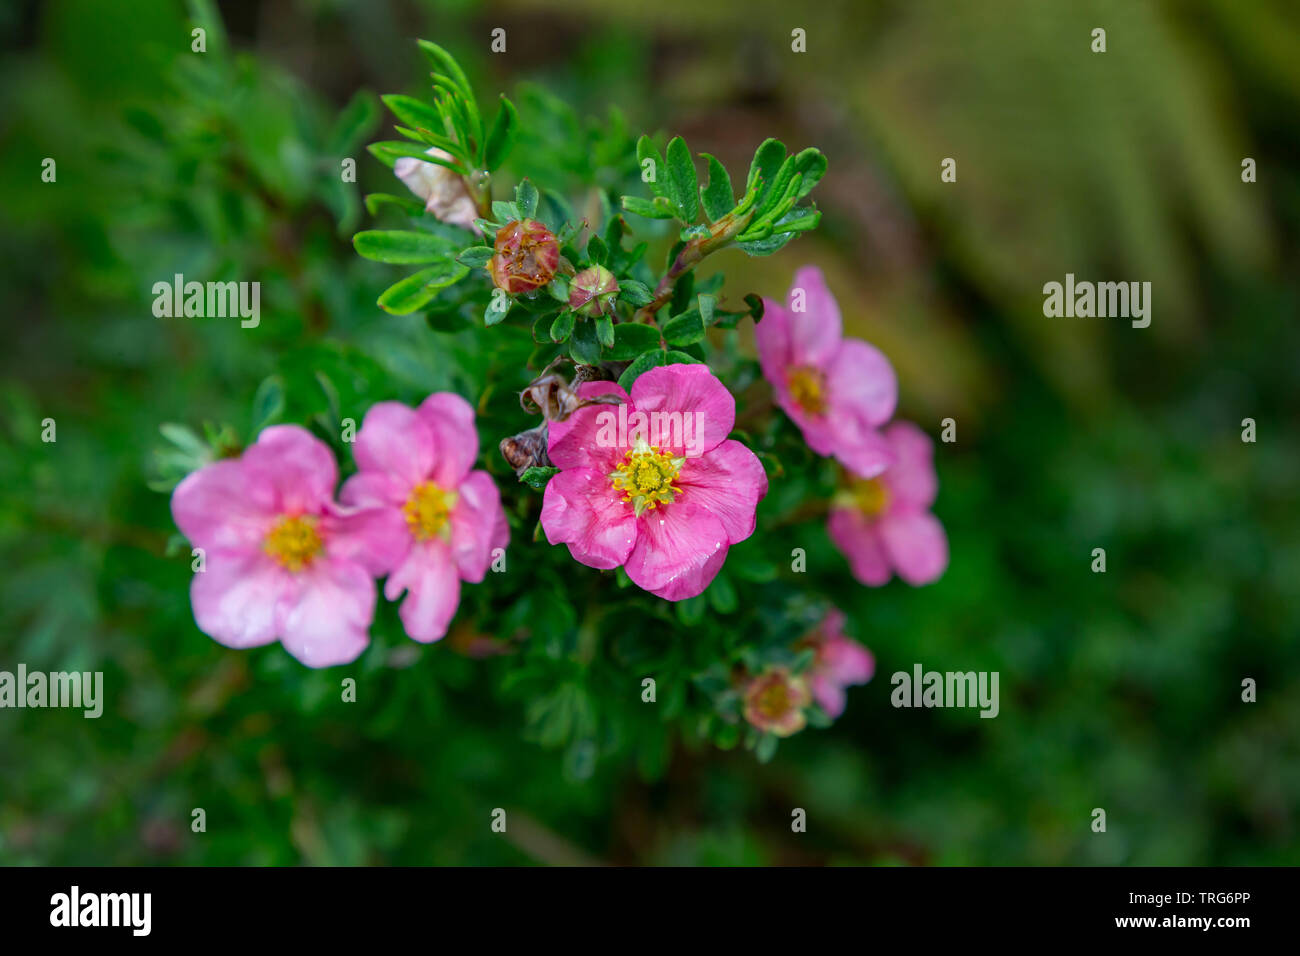 Close up of Potentilla flowers in an English country garden Stock Photo